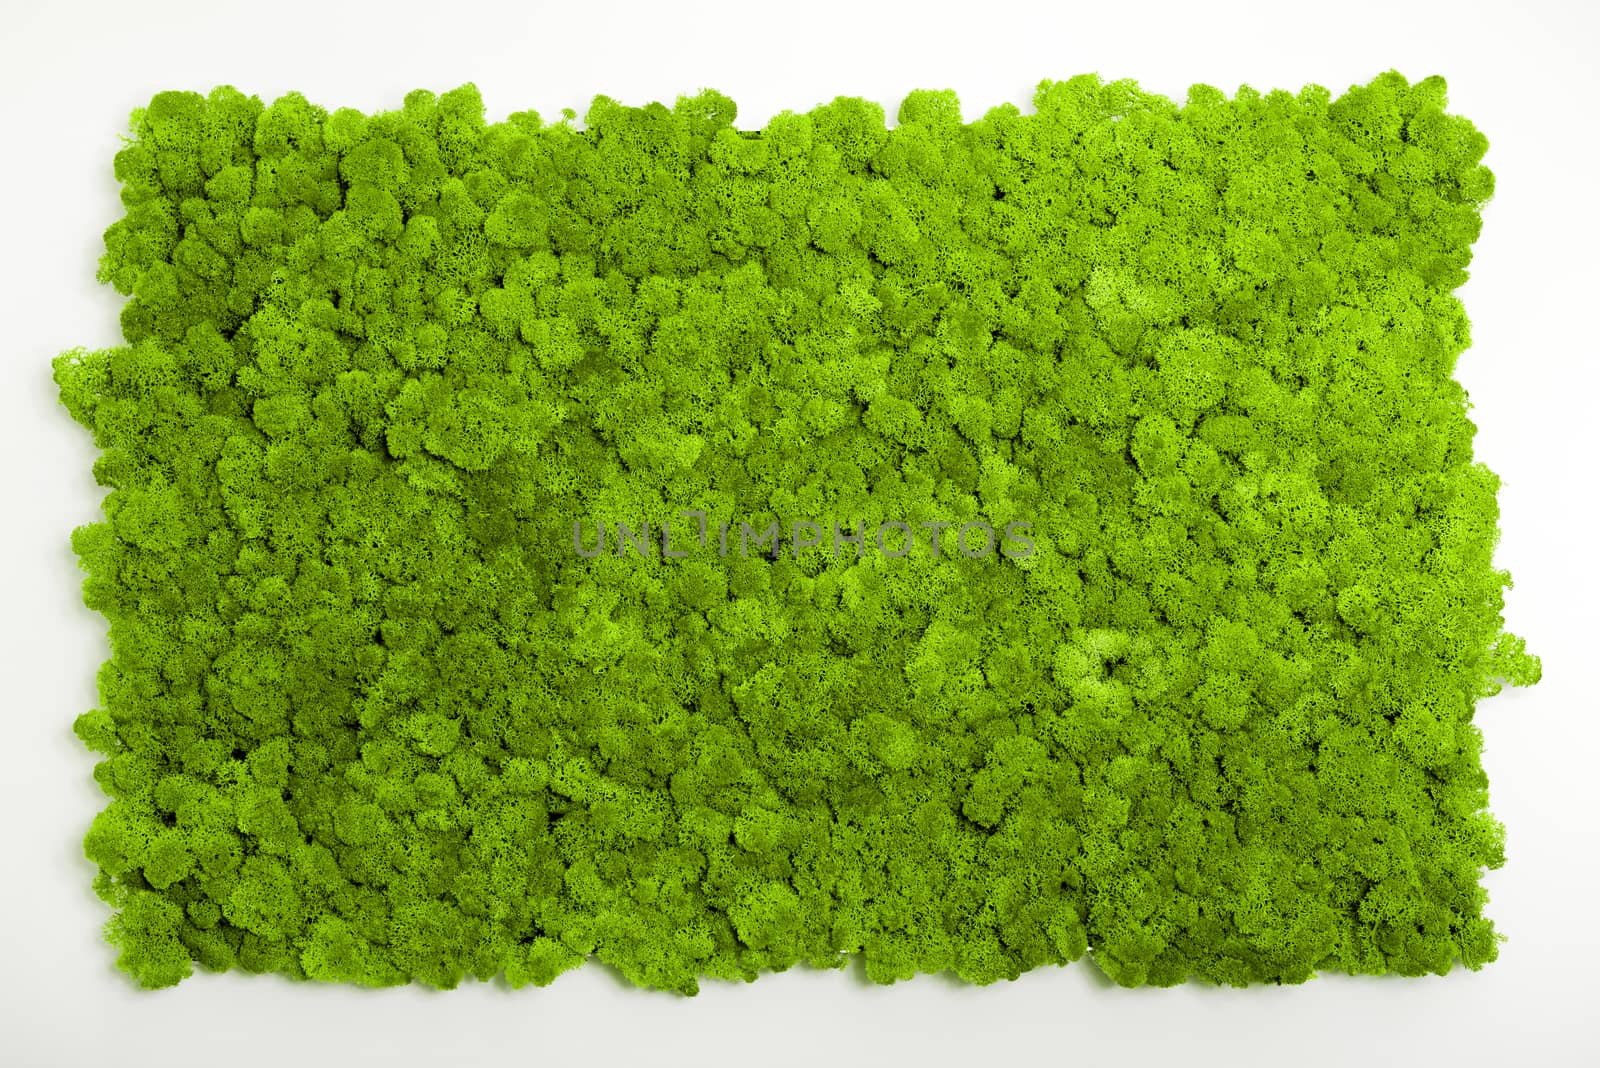 Reindeer moss wall, green wall decoration made of reindeer lichen Cladonia rangiferina, Pantone 15-0343c olor of the year 2017